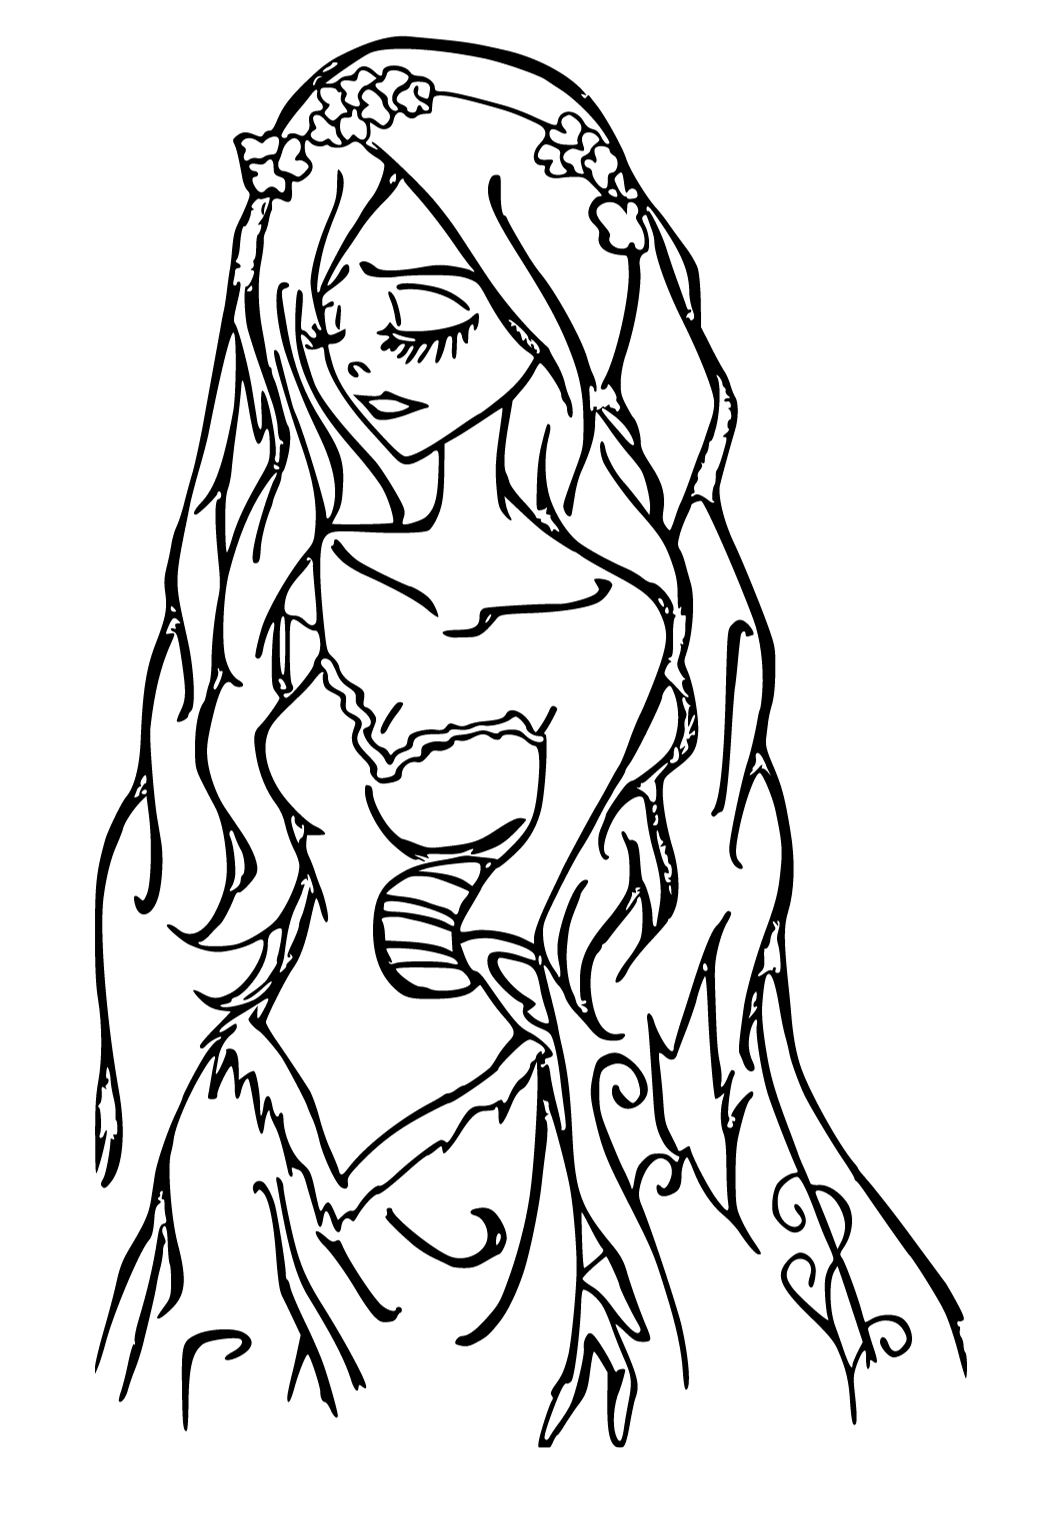 Free Printable Corpse Bride Dress Coloring Page for Adults and Kids ...